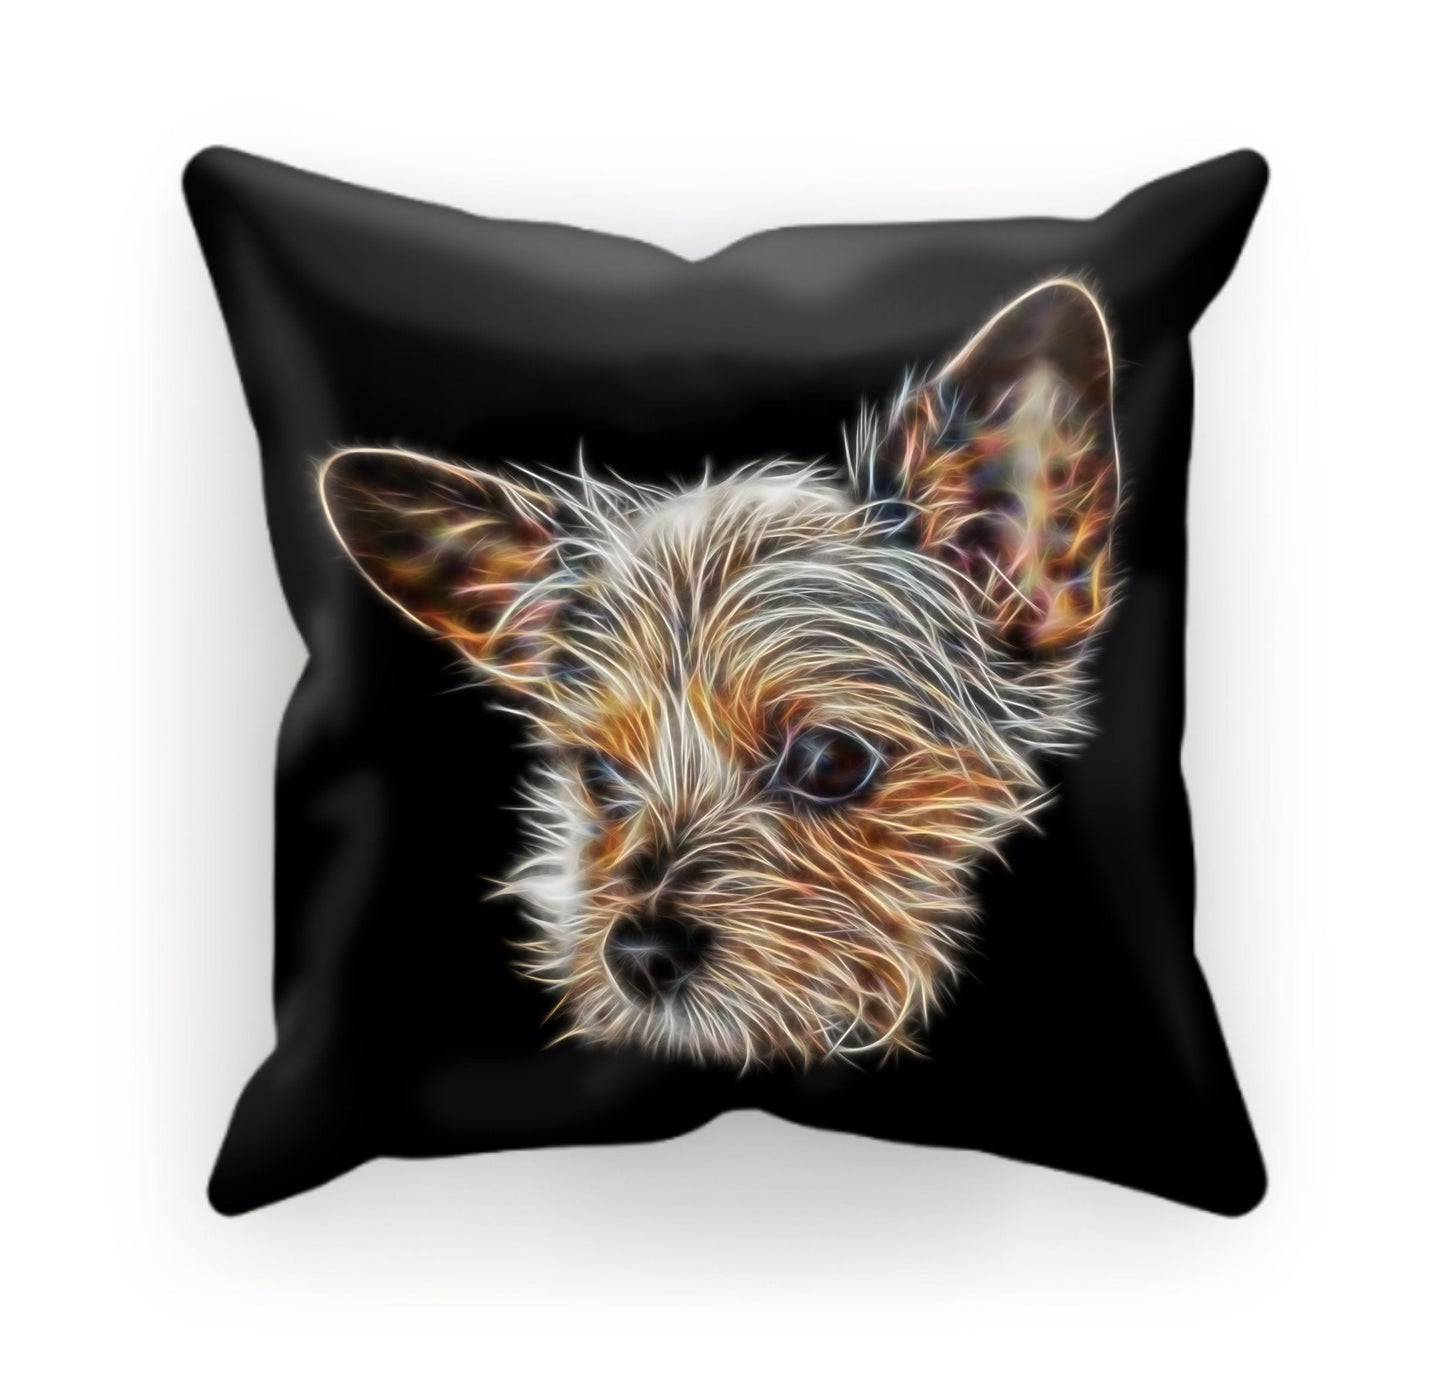 Chorkie Cushion and Insert with Stunning Fractal Art Design